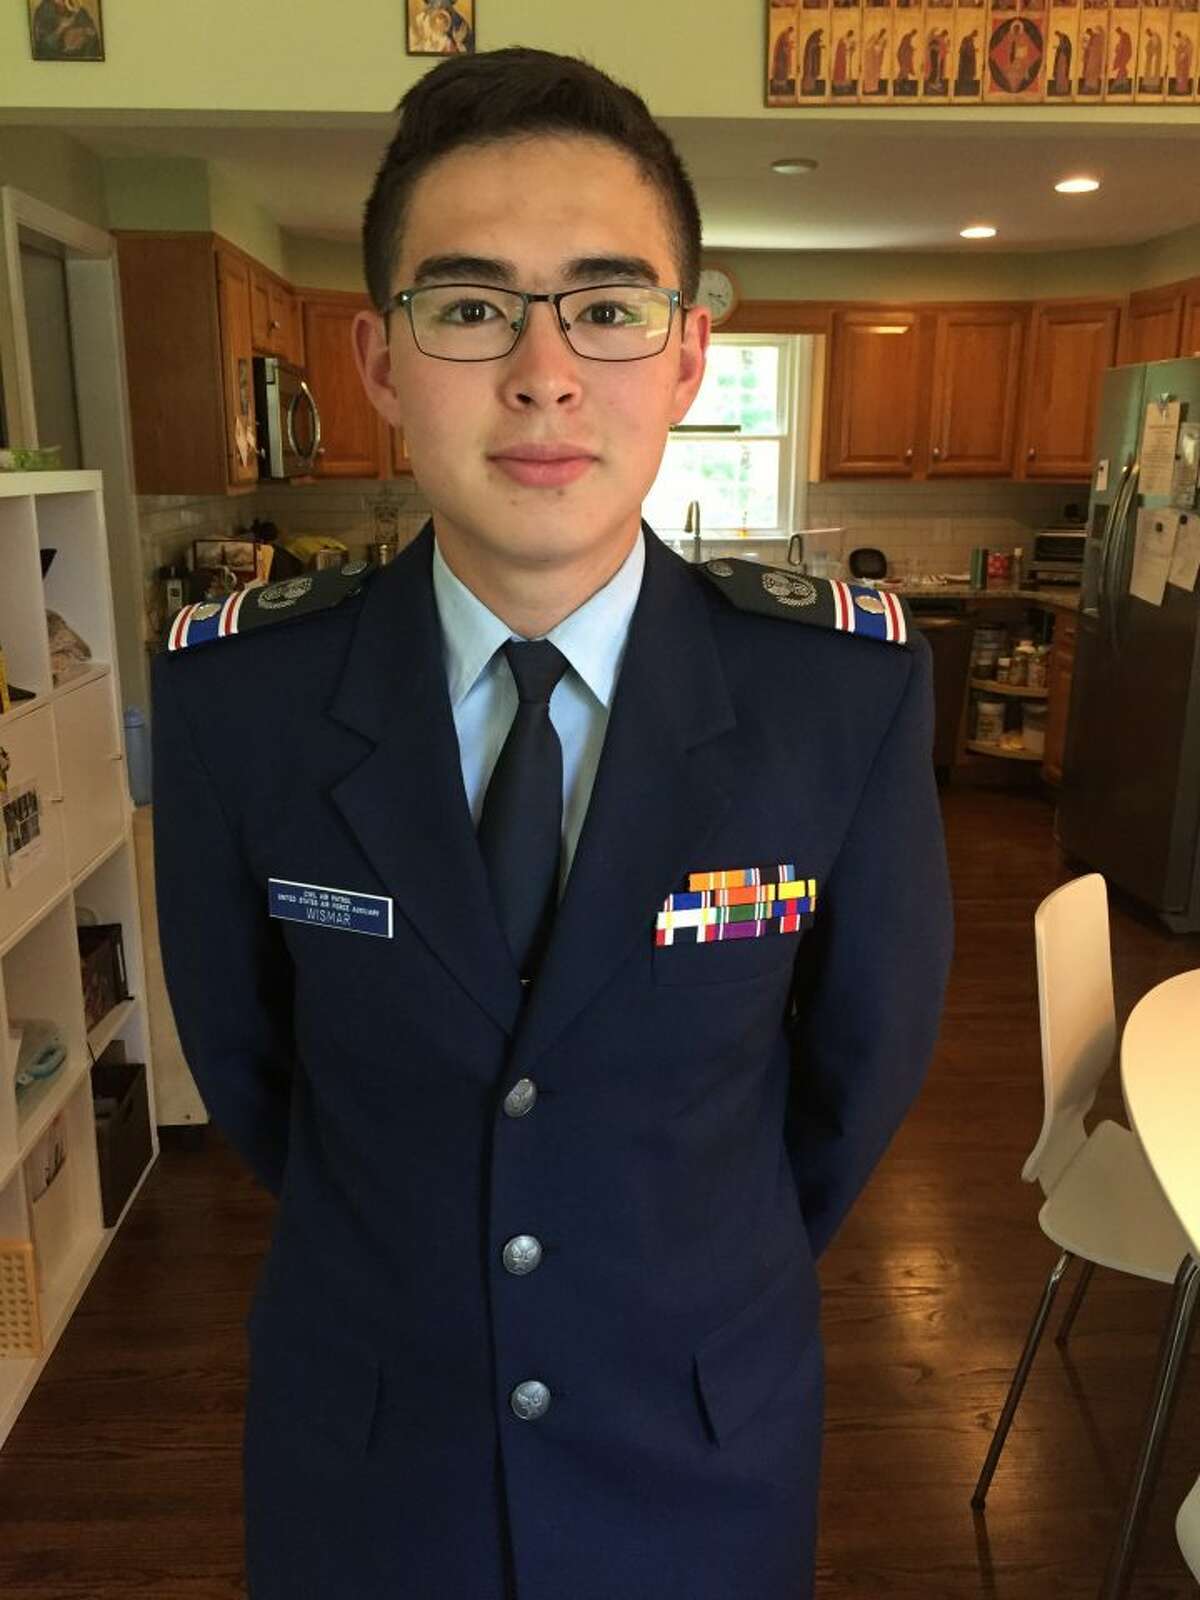 Trumbull High School junior Jorge Wismar has been selected to be among 1,000 attendees at West Point’s prestigious Summer Leaders Experience.